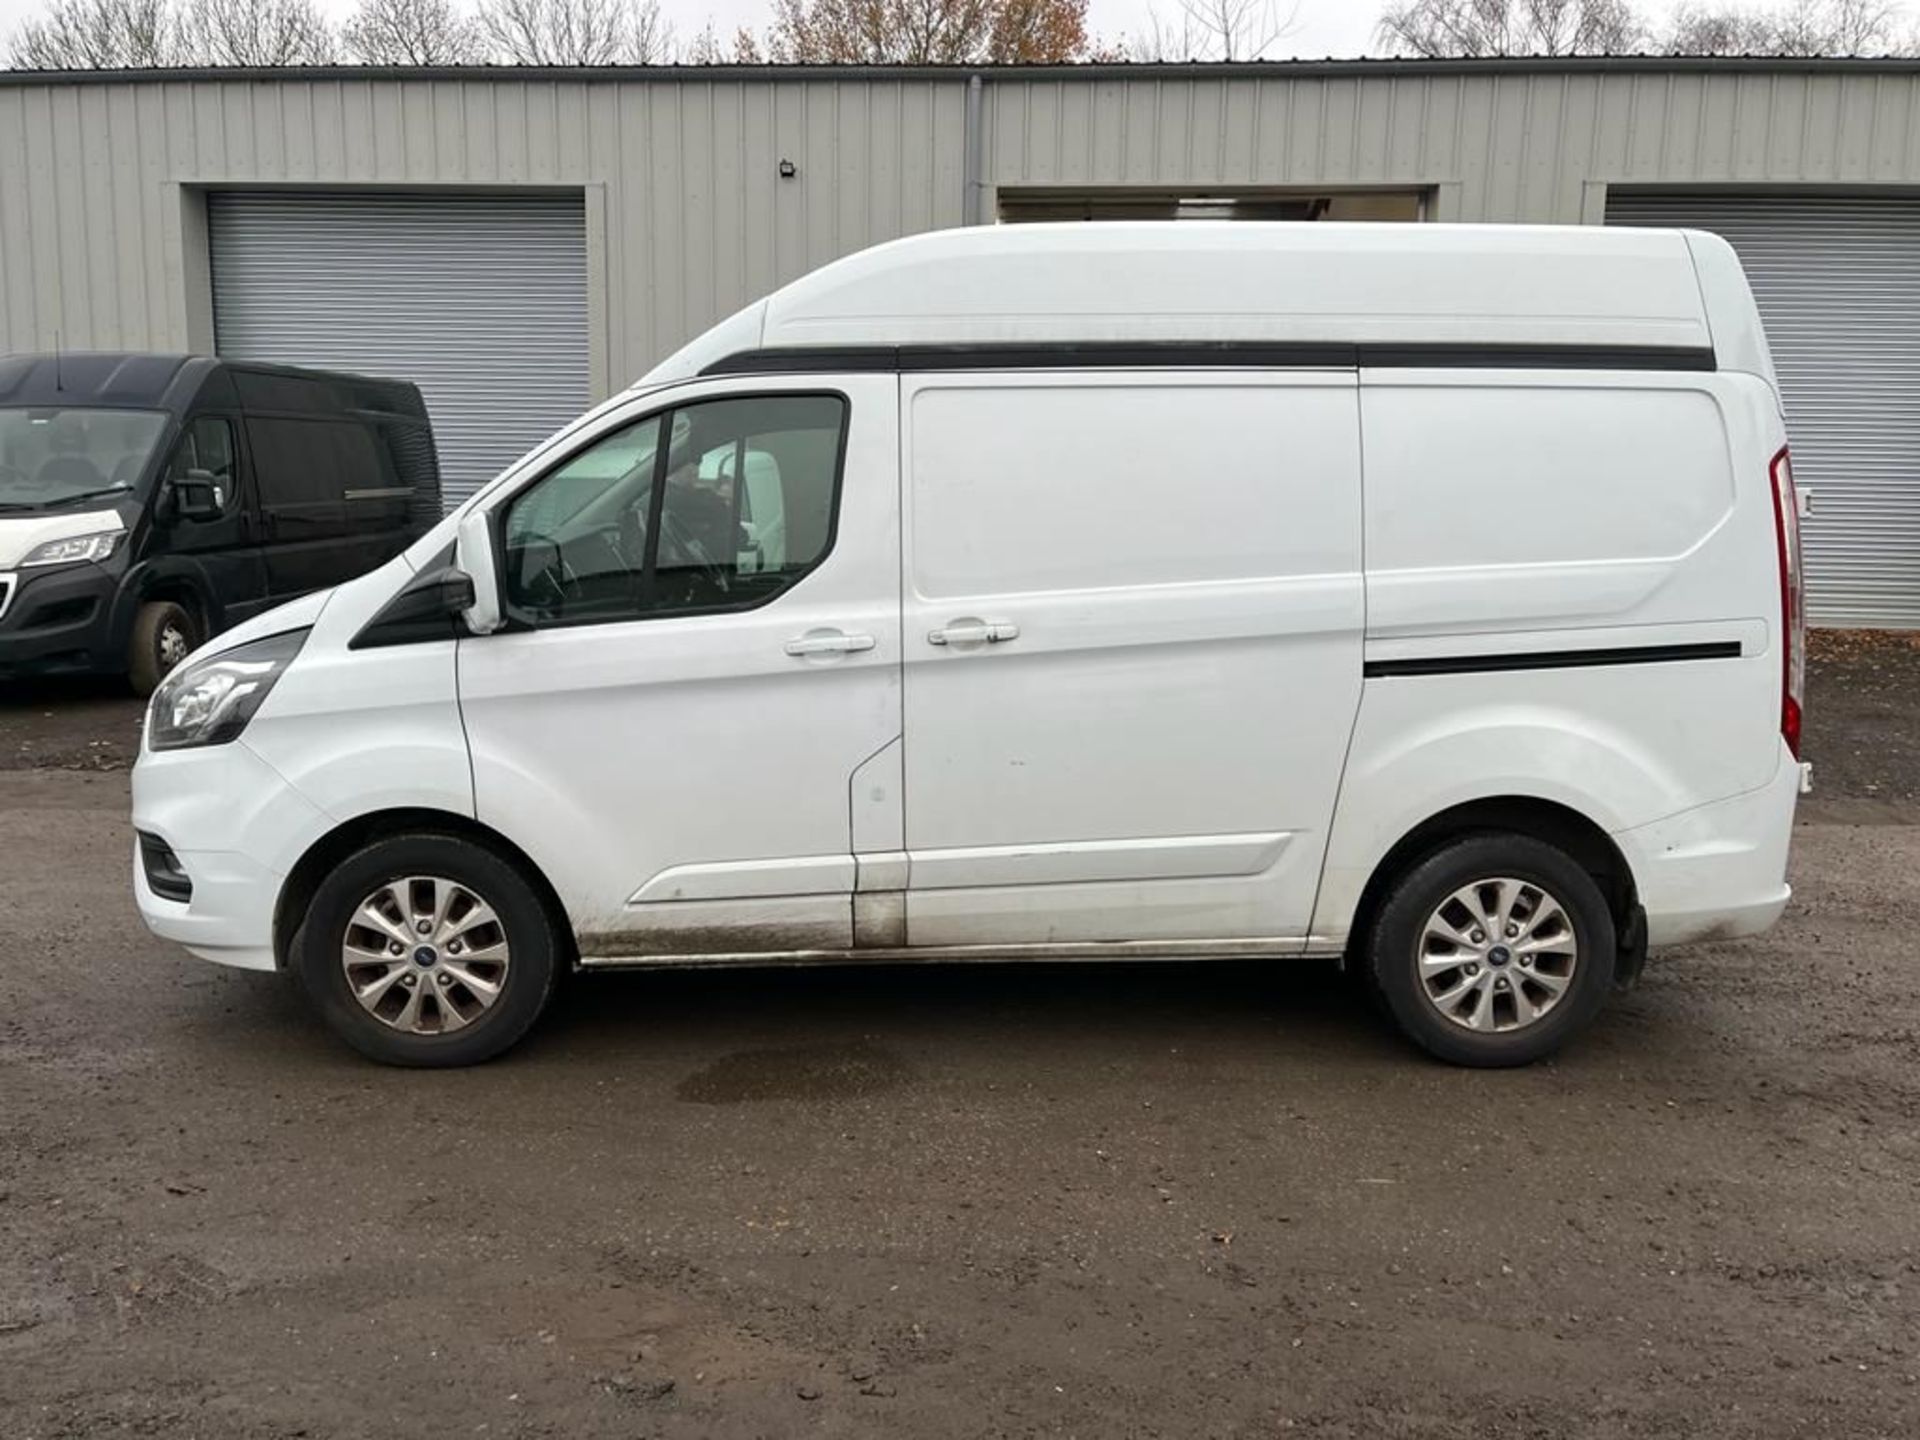 2019 19 ford Transit custom limited high roof - 87k miles - air con - alloy wheels - ply lined - Image 4 of 9